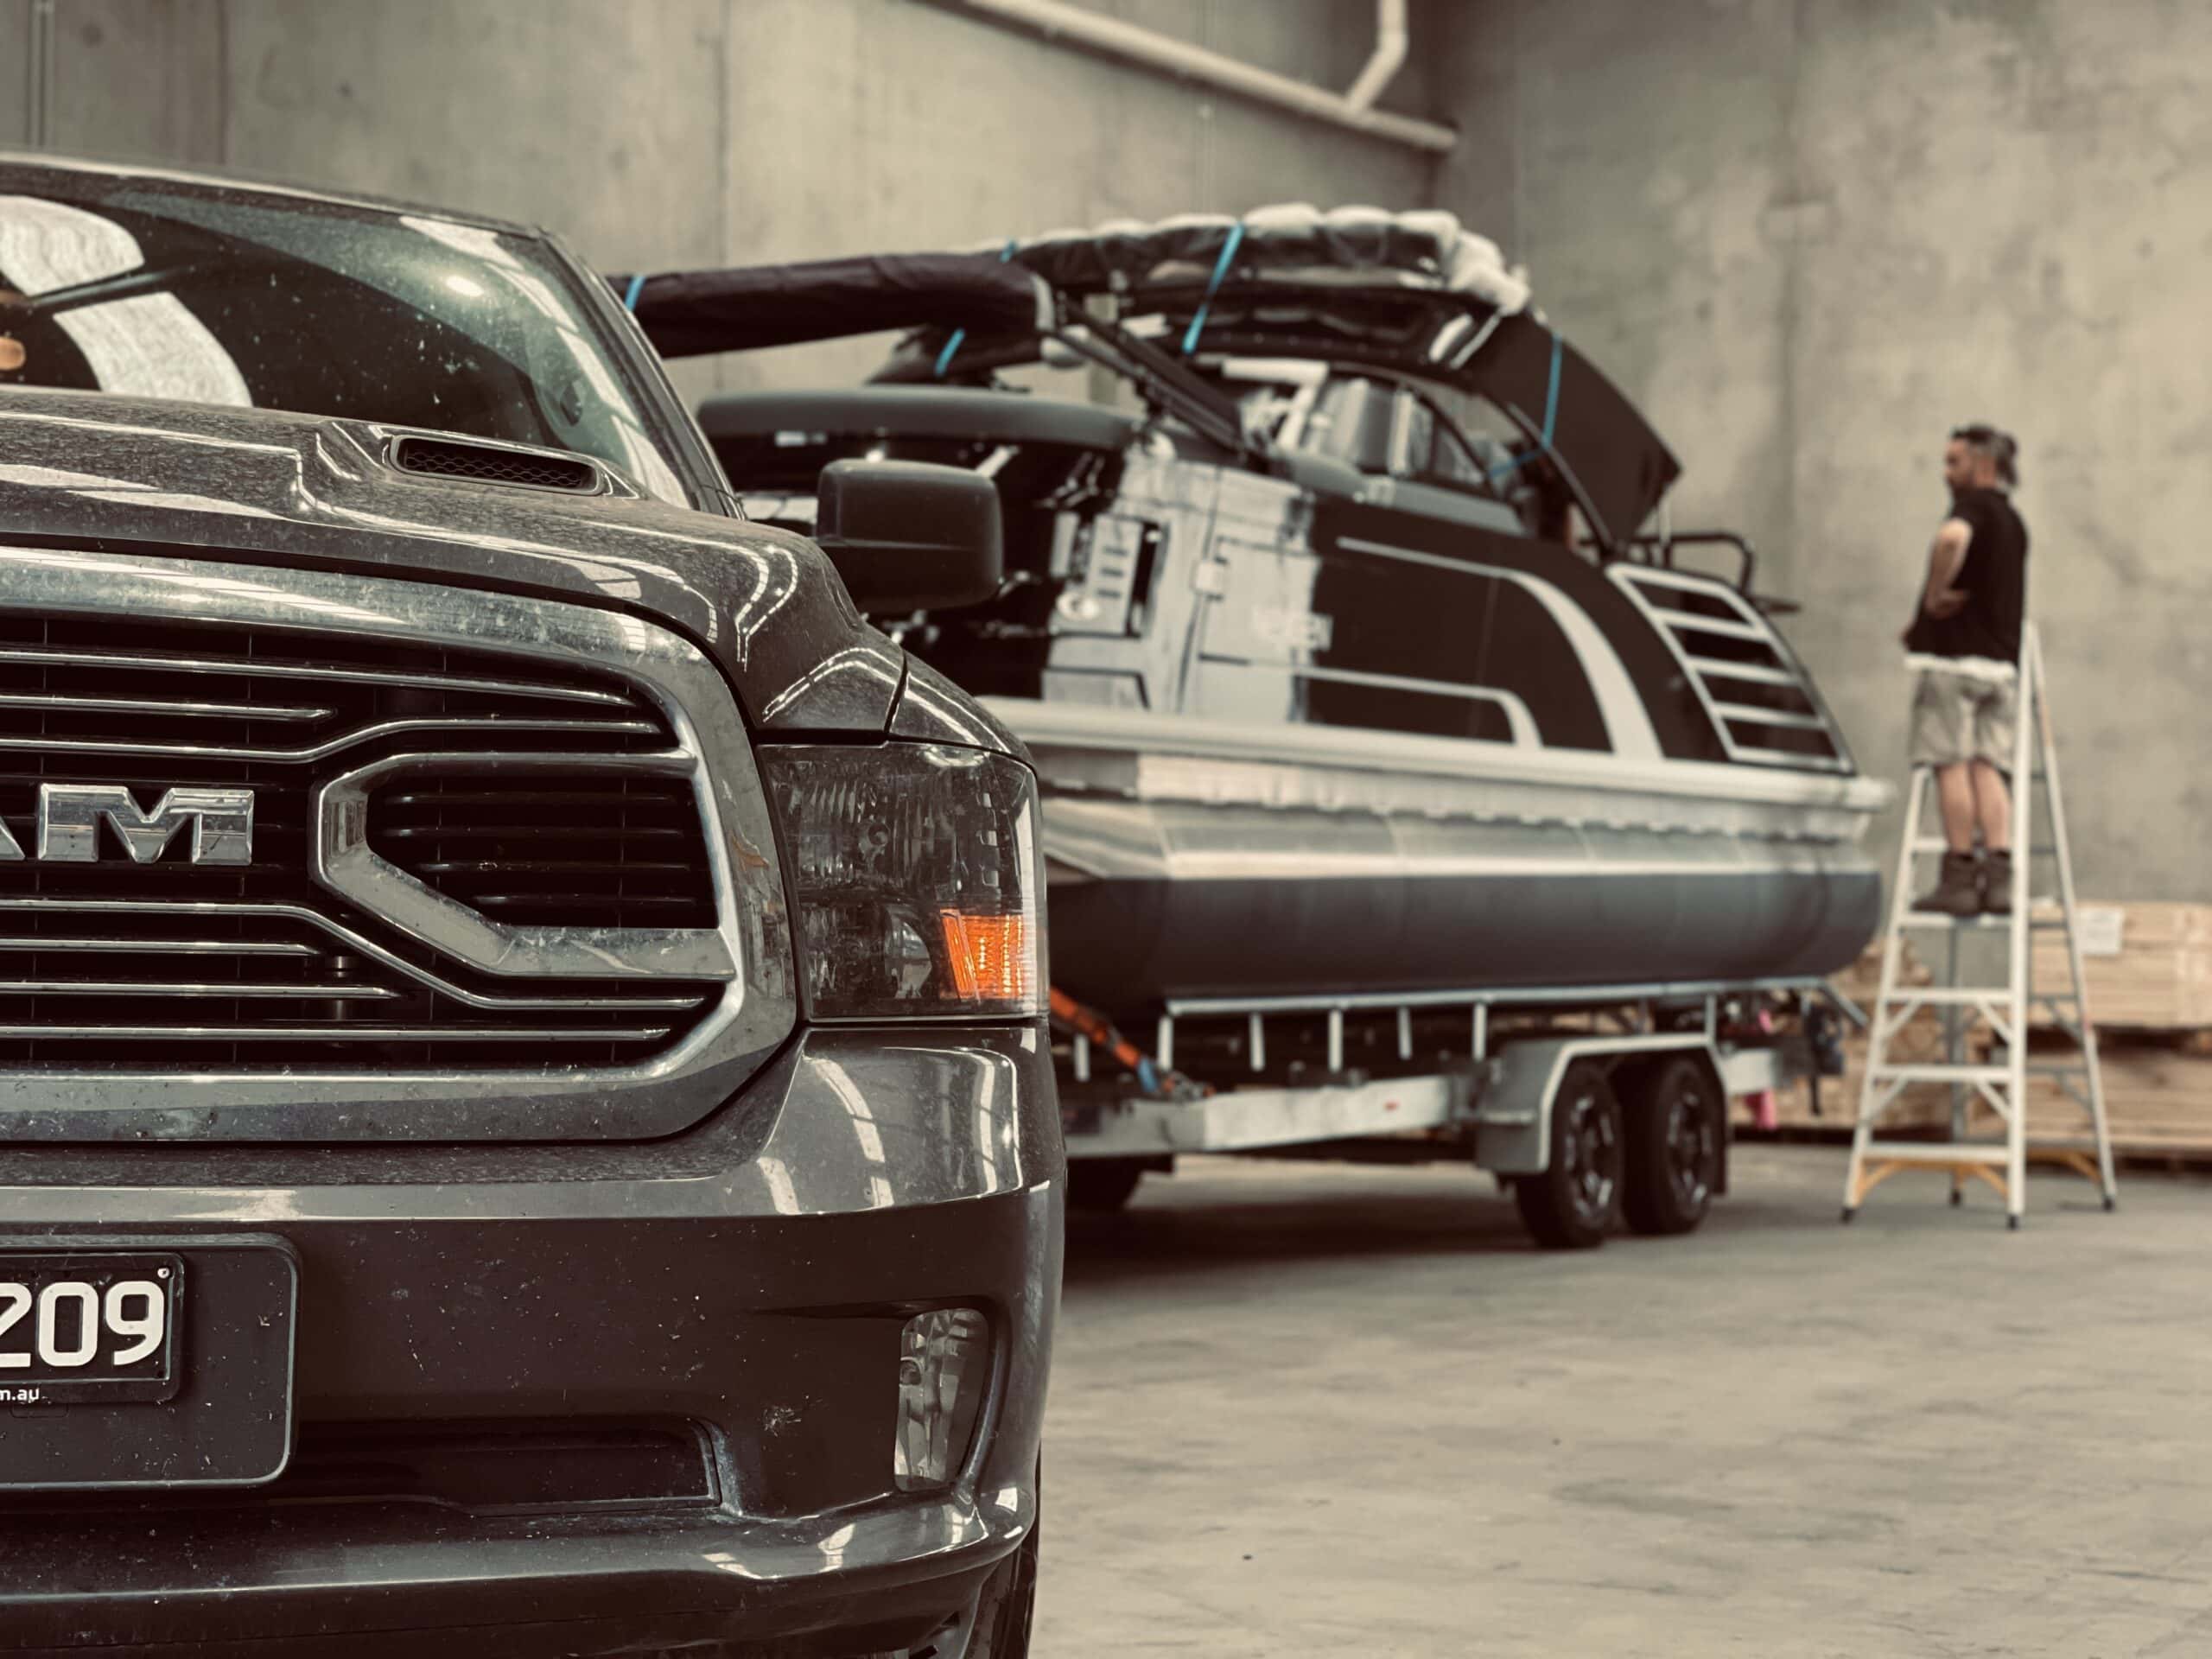 marine boat and Dodge Ram parked in Crate n Pack Factory